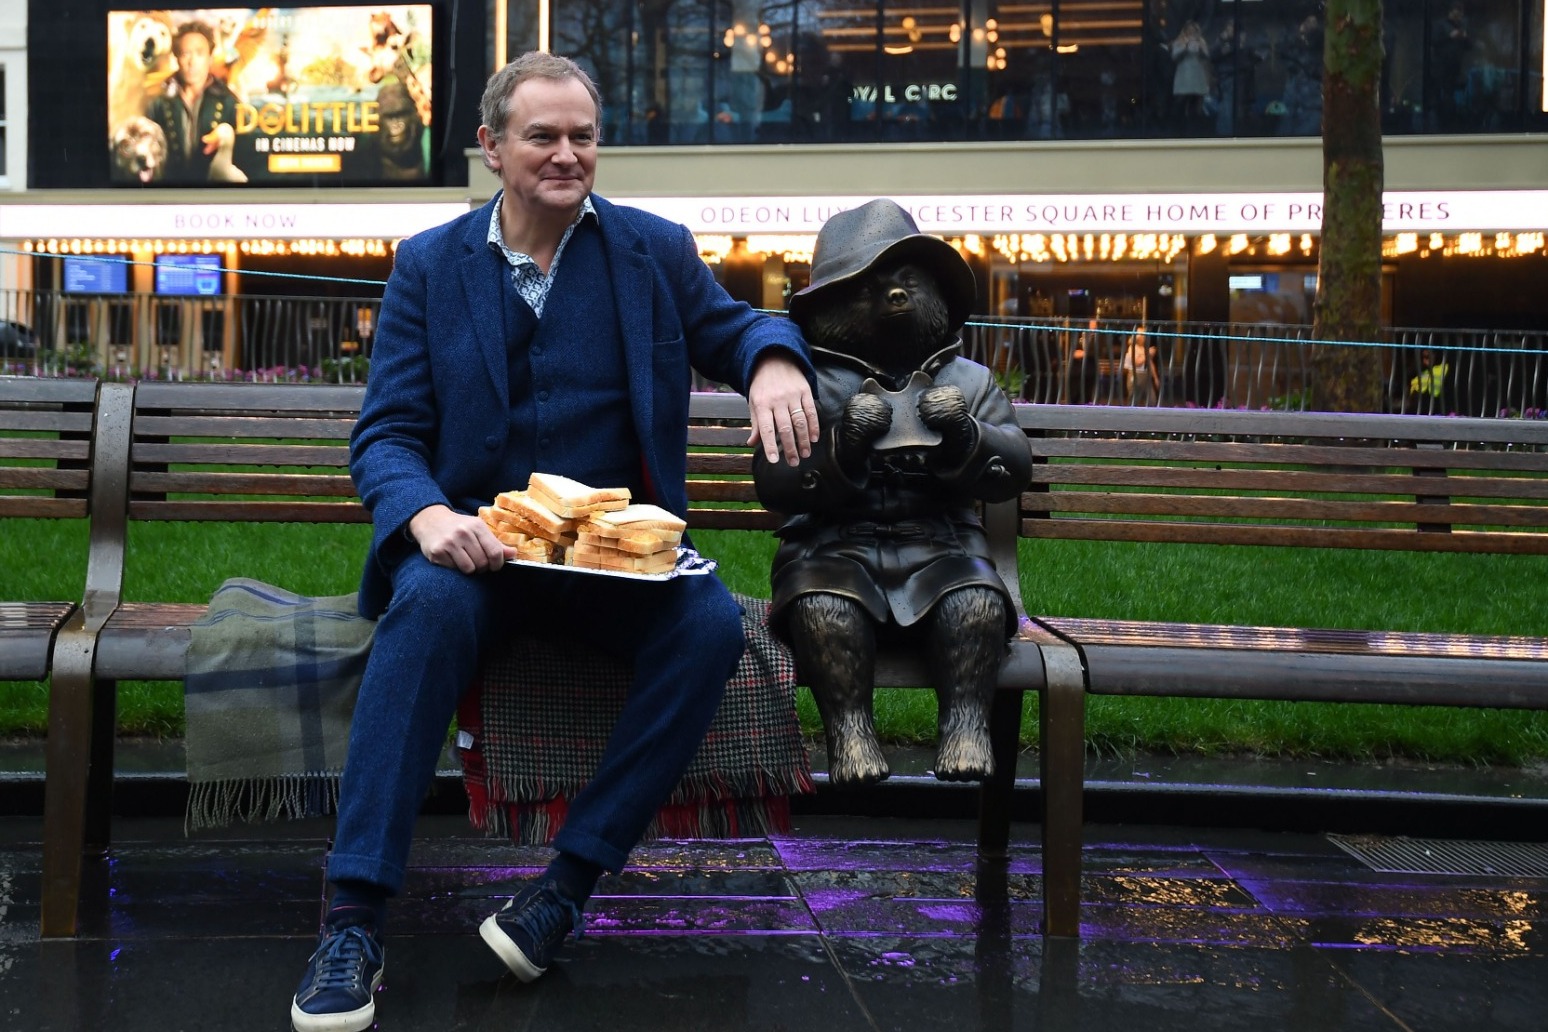 Statues celebrating a century of cinema unveiled in Leicester Square 